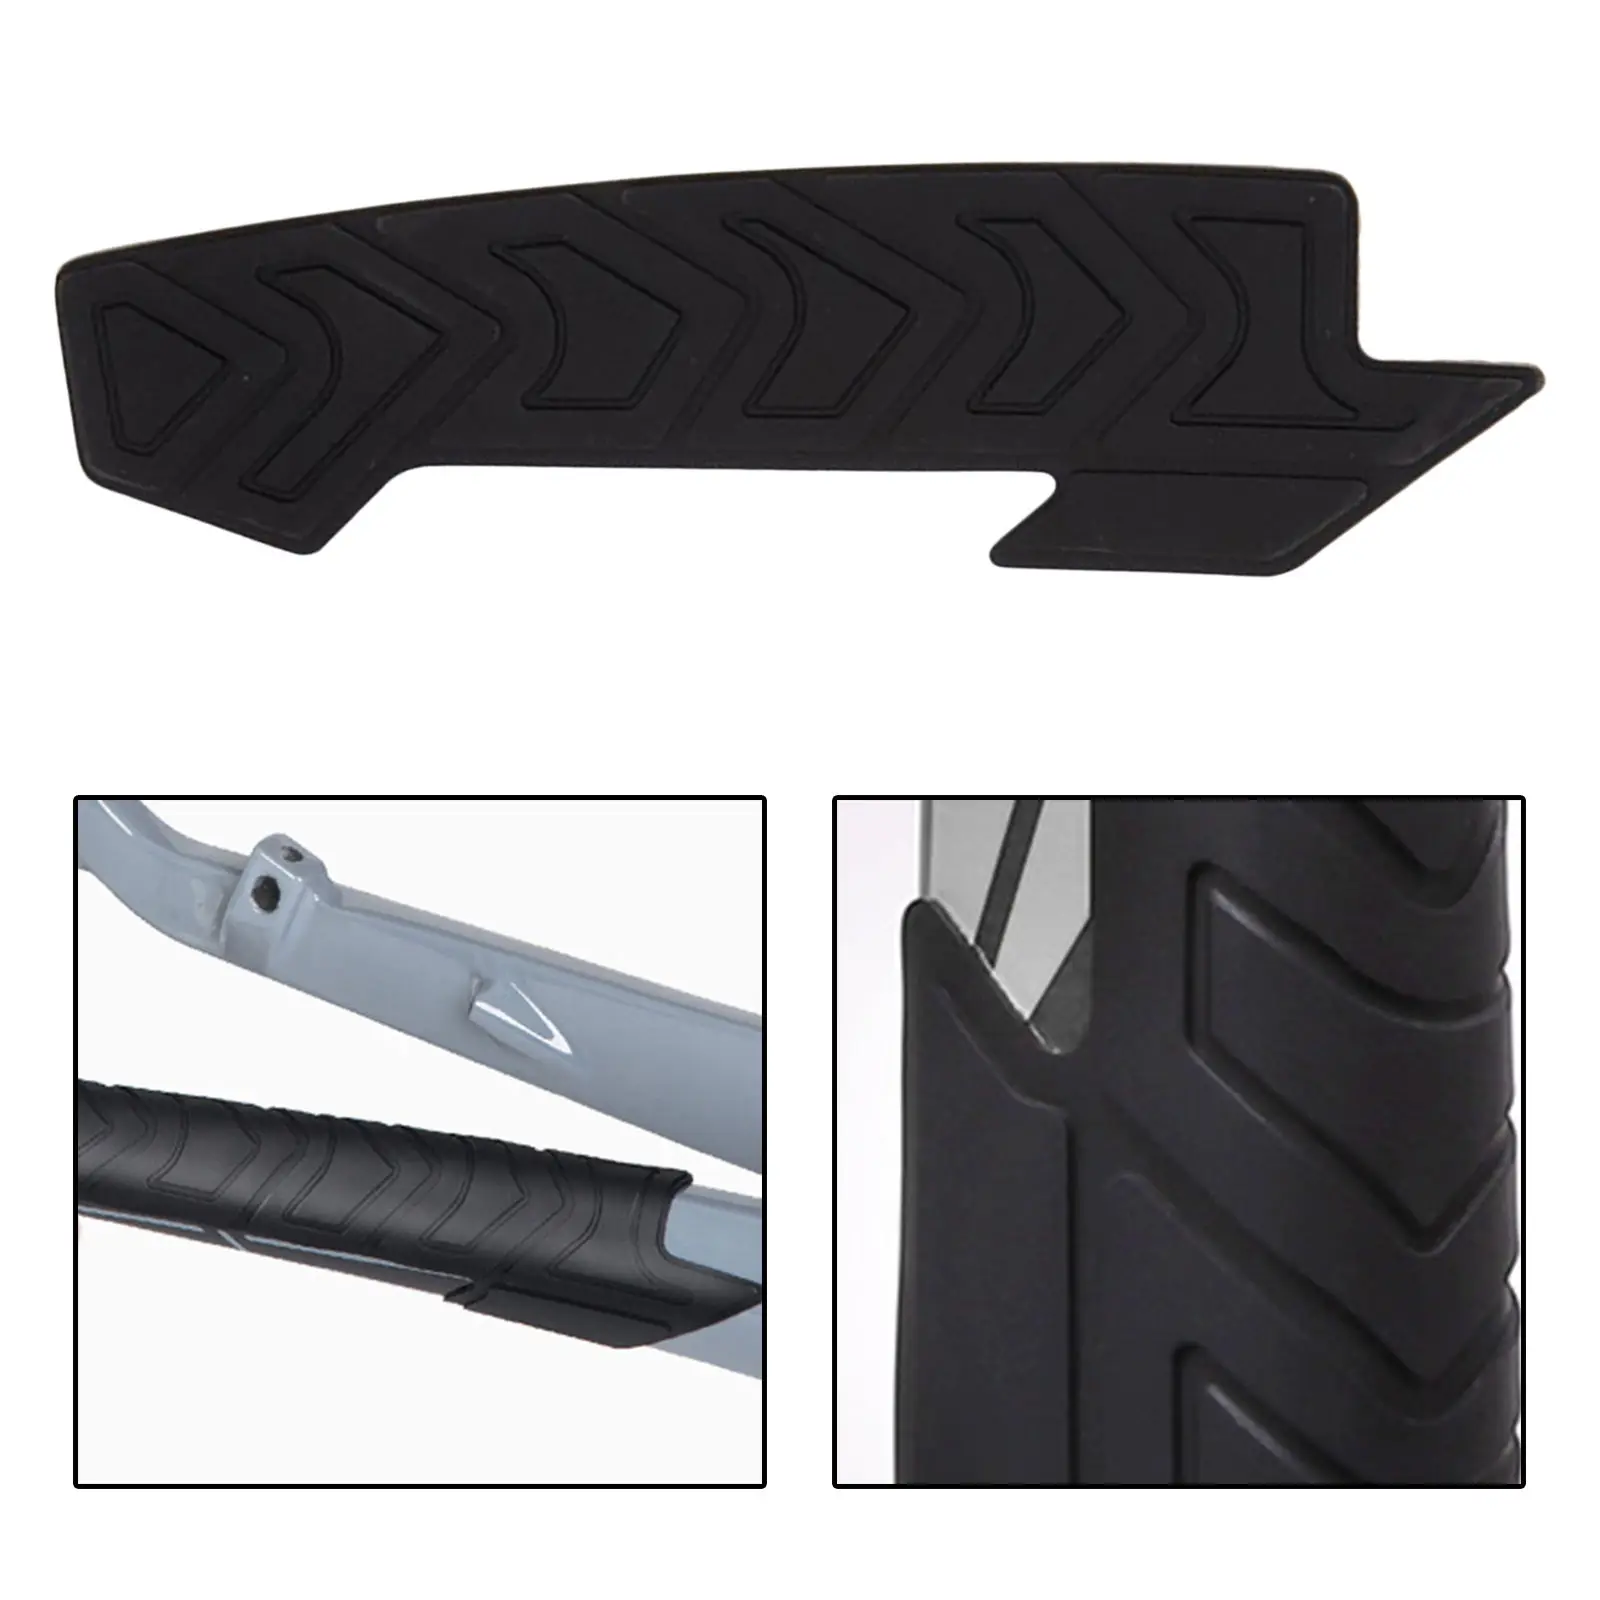 Waterproof Bike Chain Protector Guard Mountain Bicycle Frames Protect Tape Protector Adhesive Decorative Removable Bike Accs